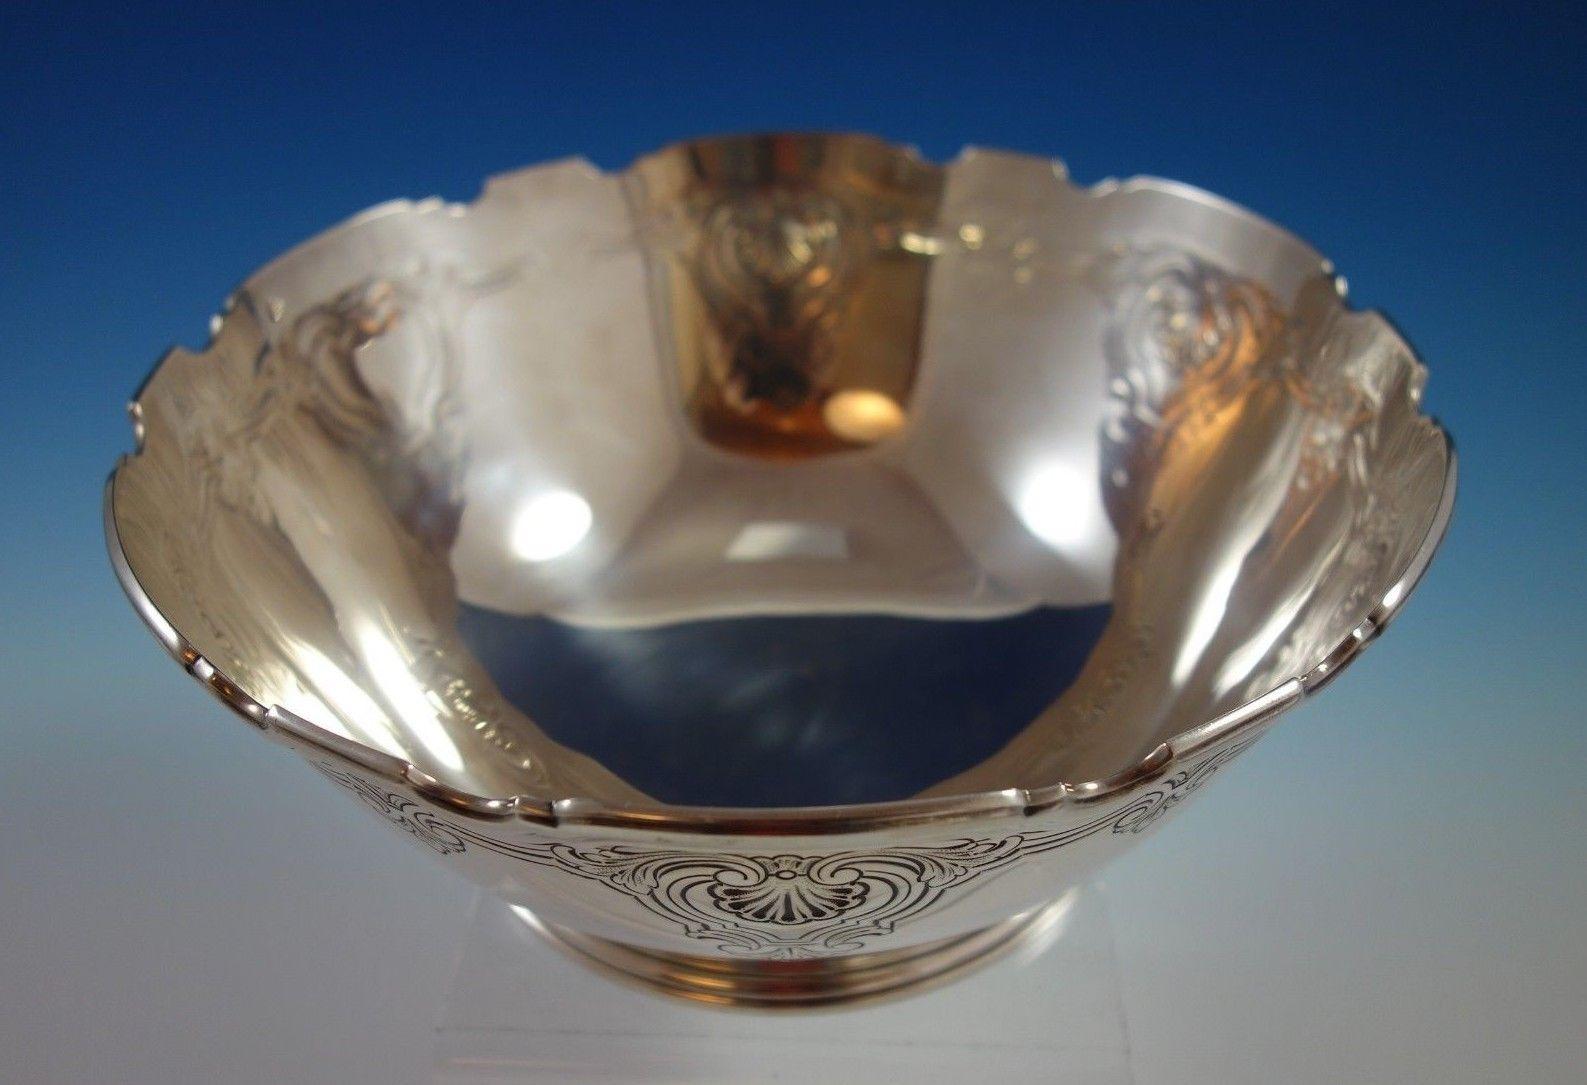 Shell and thread by Tiffany & Co.
Beautiful shell and Thread by Tiffany & Co. sterling silver fruit bowl. The piece is marked #22548H/8887 and stylized m date mark for 1907-47. The bowl measures 3 1/2 tall and 9 in diameter, and weighs 25.2 troy